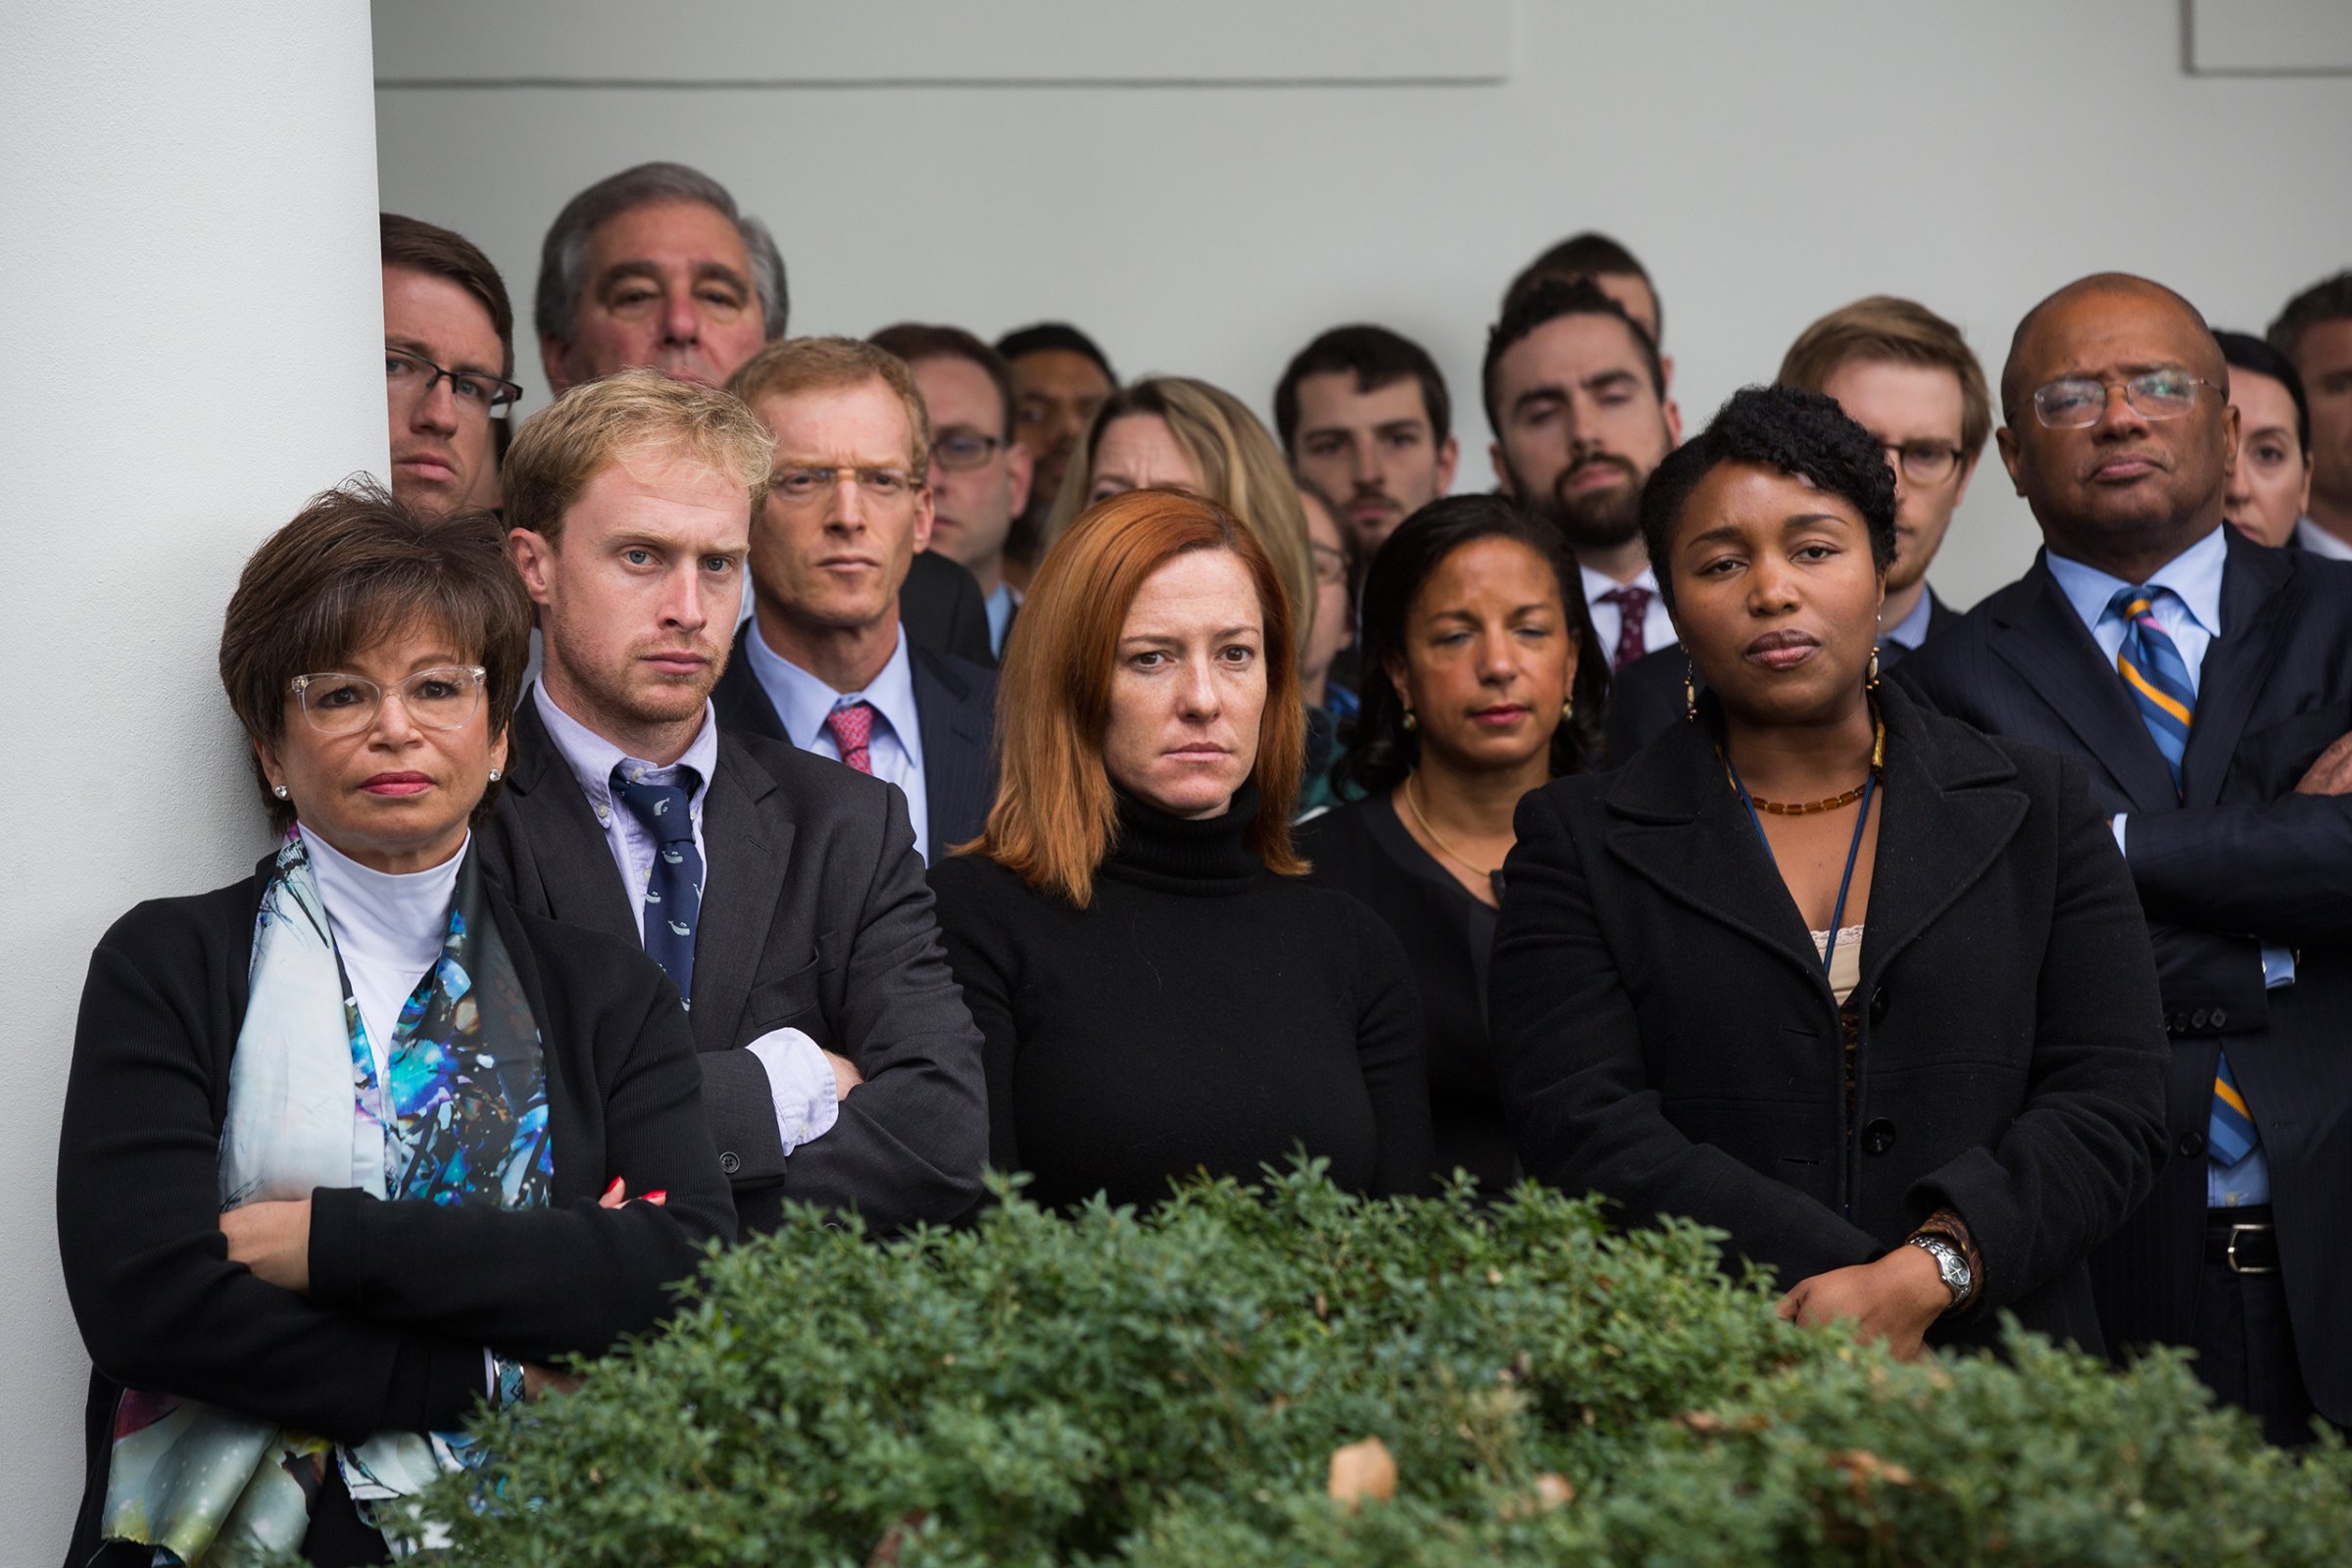 White House staff members listen to President Obama speak about Republican presidential nominee Donald Trump's victory over Democratic candidate Hillary Clinton for the presidency in the Rose Garden of the White House on Nov. 9.